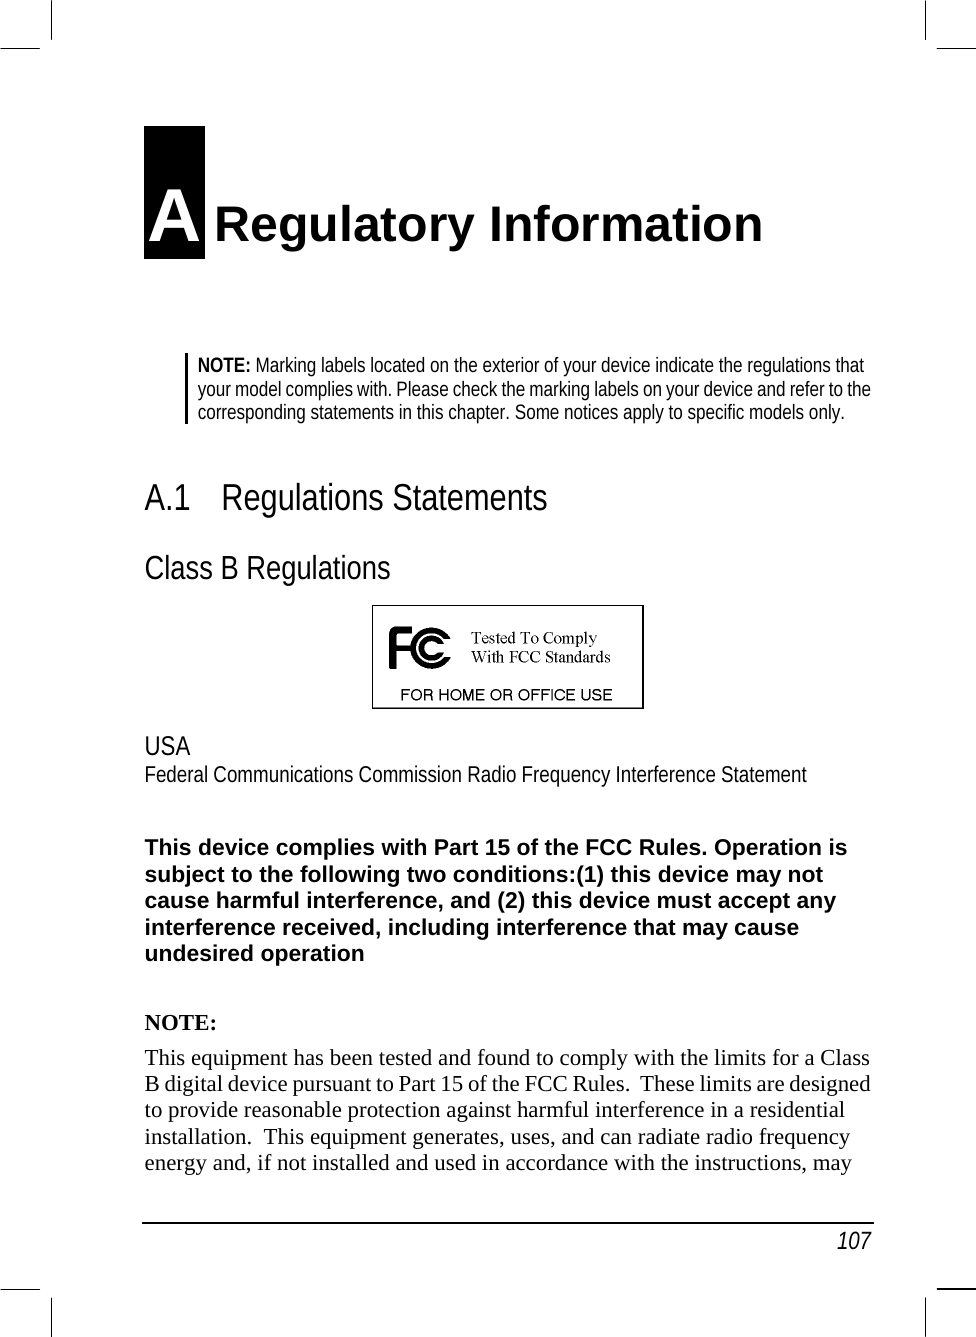   107 A Regulatory Information NOTE: Marking labels located on the exterior of your device indicate the regulations that your model complies with. Please check the marking labels on your device and refer to the corresponding statements in this chapter. Some notices apply to specific models only.   A.1 Regulations Statements Class B Regulations  USA Federal Communications Commission Radio Frequency Interference Statement  This device complies with Part 15 of the FCC Rules. Operation is subject to the following two conditions:(1) this device may not cause harmful interference, and (2) this device must accept any interference received, including interference that may cause undesired operation  NOTE: This equipment has been tested and found to comply with the limits for a Class B digital device pursuant to Part 15 of the FCC Rules.  These limits are designed to provide reasonable protection against harmful interference in a residential installation.  This equipment generates, uses, and can radiate radio frequency energy and, if not installed and used in accordance with the instructions, may 